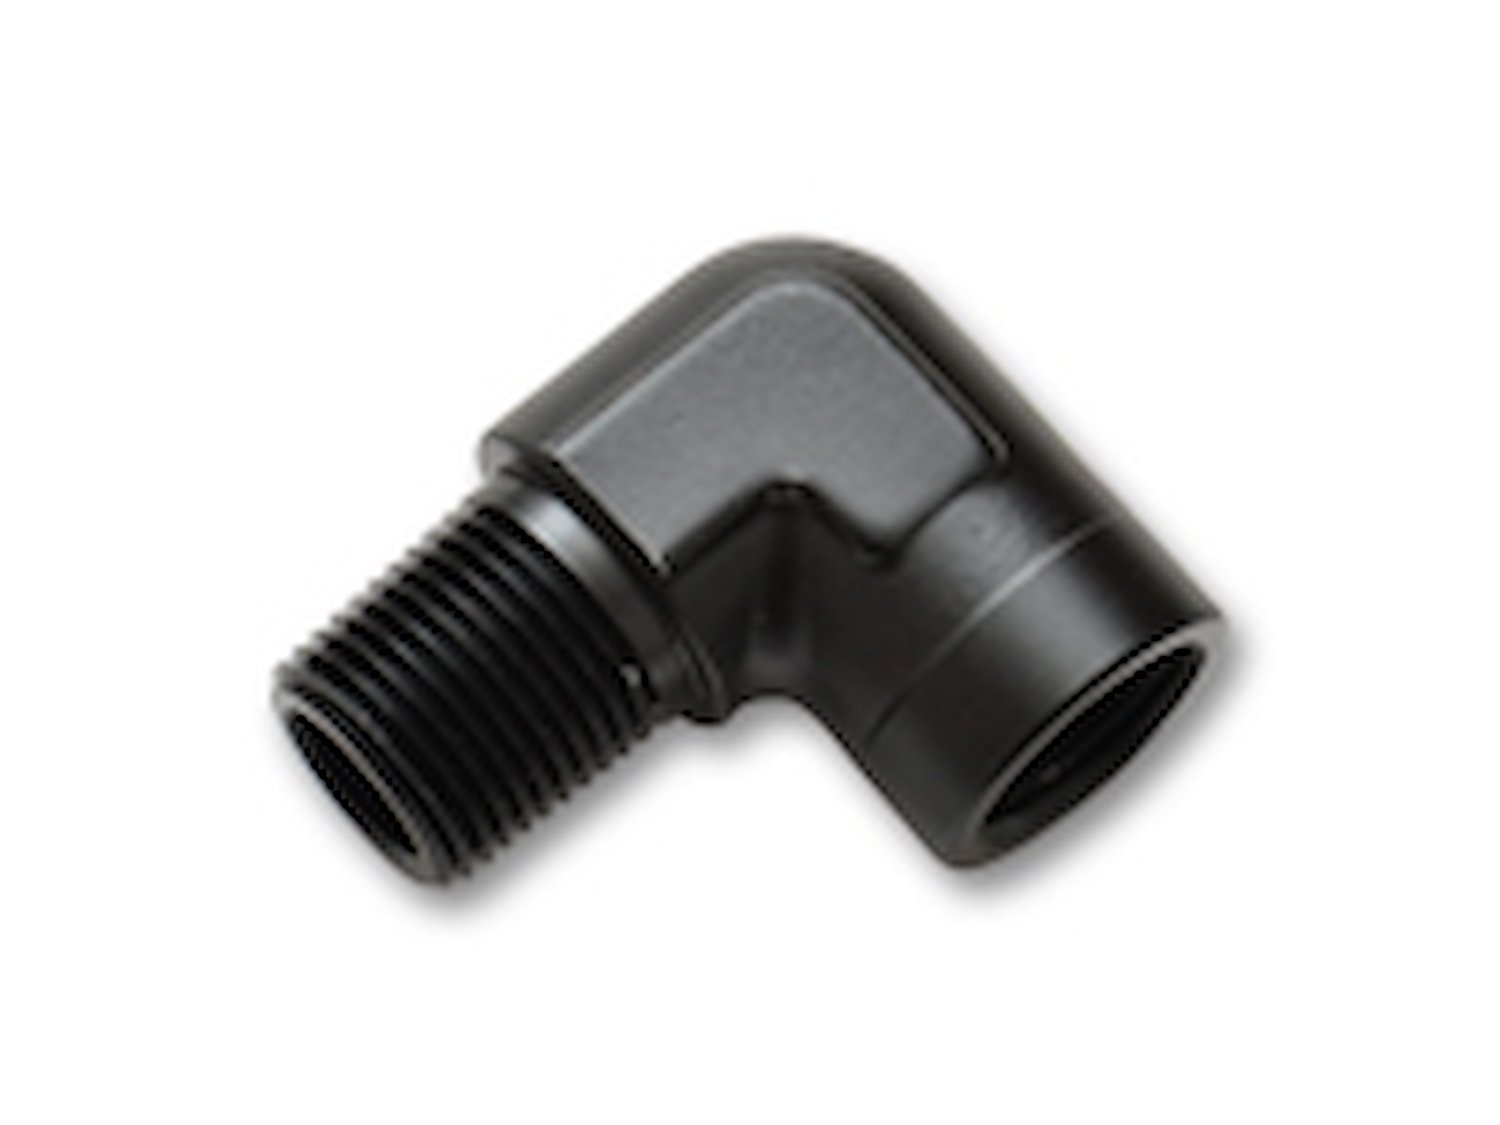 90 Degree Female NPT to Male NPT Adapter Fitting [1/4 in. Female NPT to 1/4 in. Male NPT, Black]